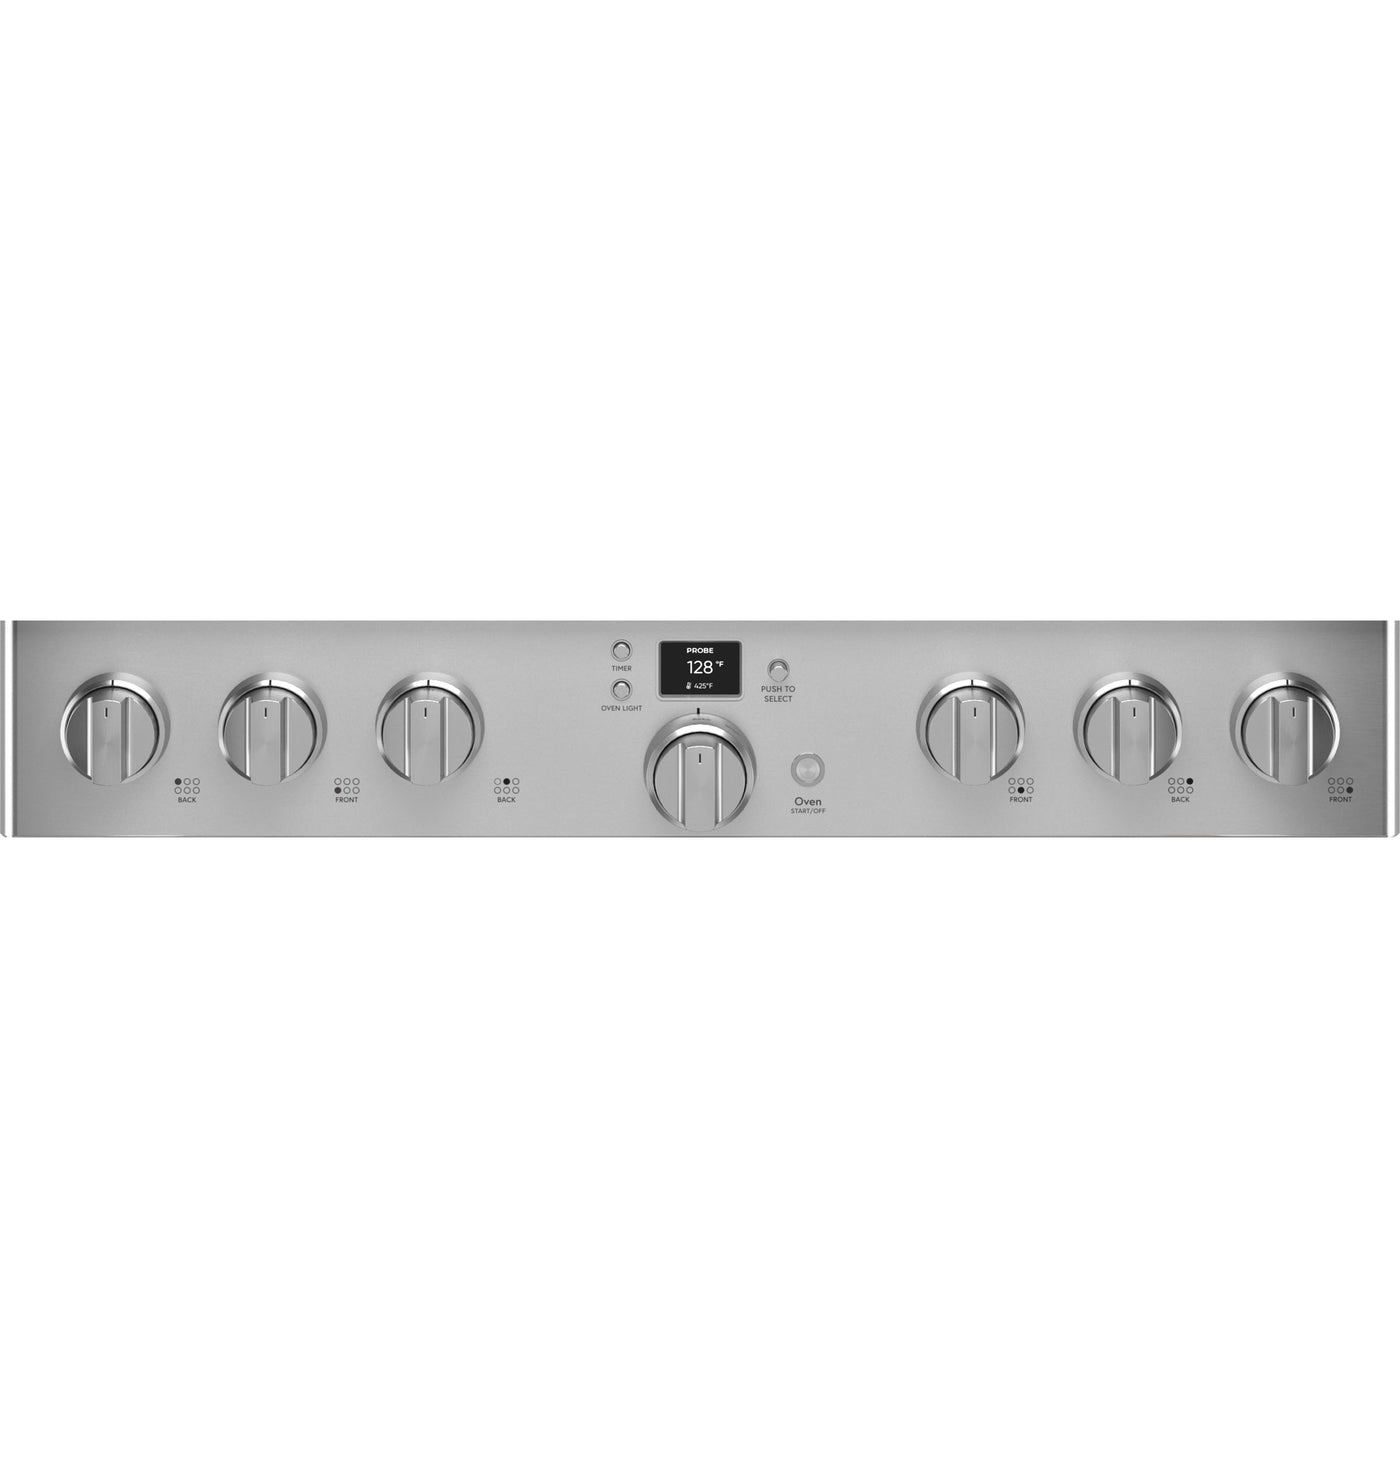 Café Stainless Steel 36" Commercial-Style 6-Burner Dual-Fuel Smart Range with Air Fry (5.75 Cu.Ft) - C2Y366P2TS1